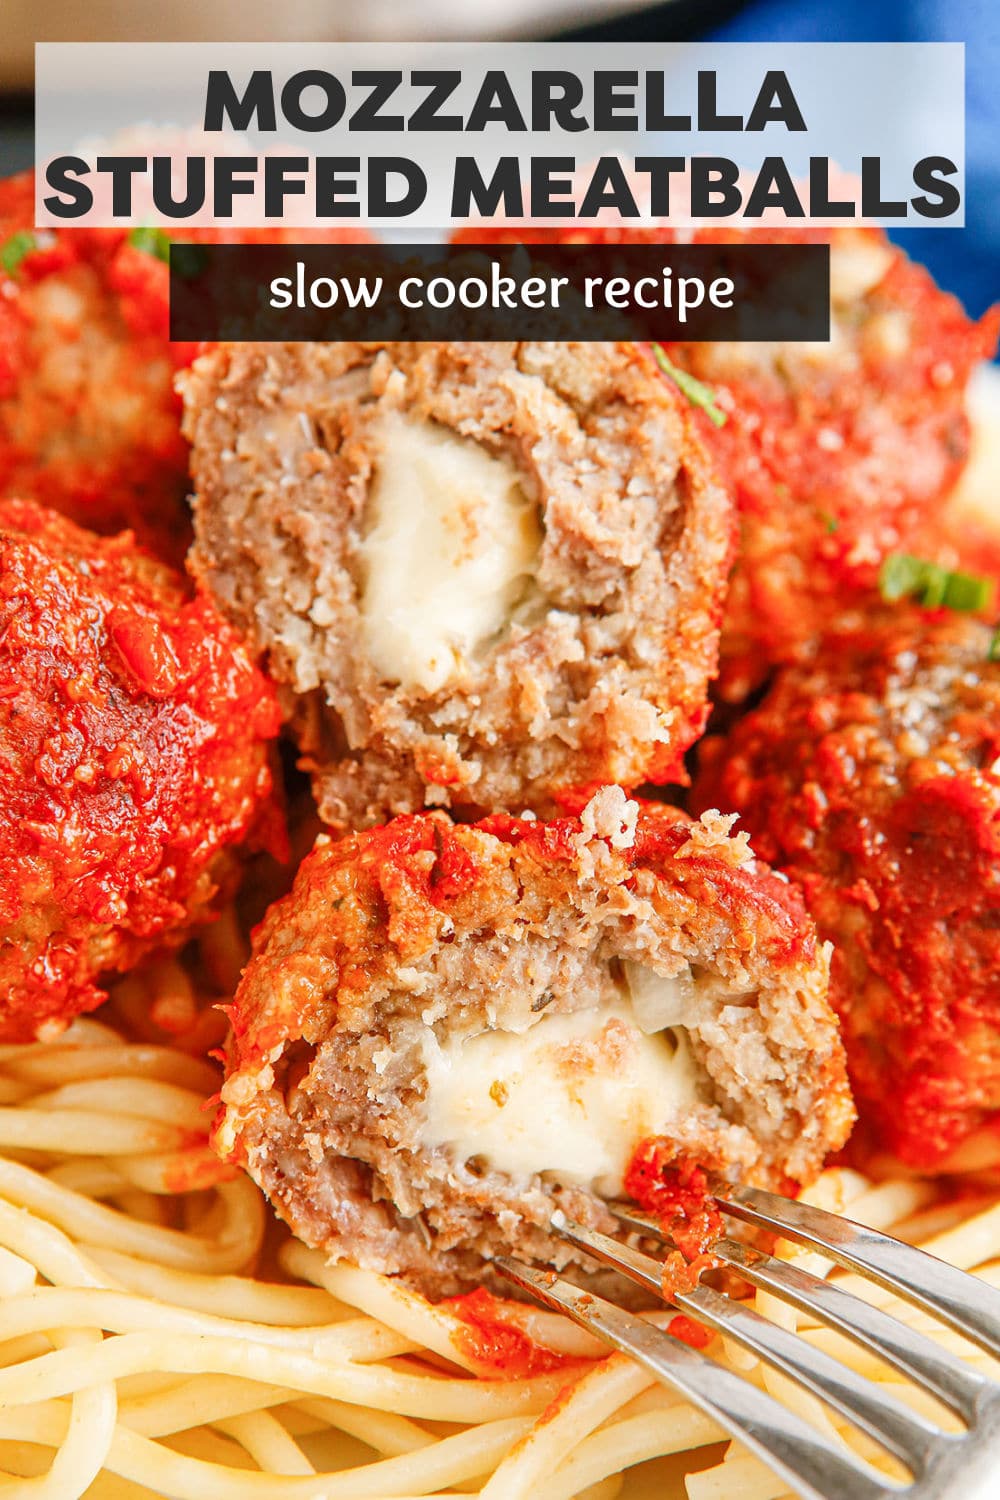 Easy and flavorful Slow Cooker Mozzarella Stuffed Meatballs are made with lean ground beef or turkey and stuffed with cheese. Served over zoodles, or your favorite noodle, this is a healthy and delicious recipe made right in your crockpot! | www.persnicketyplates.com